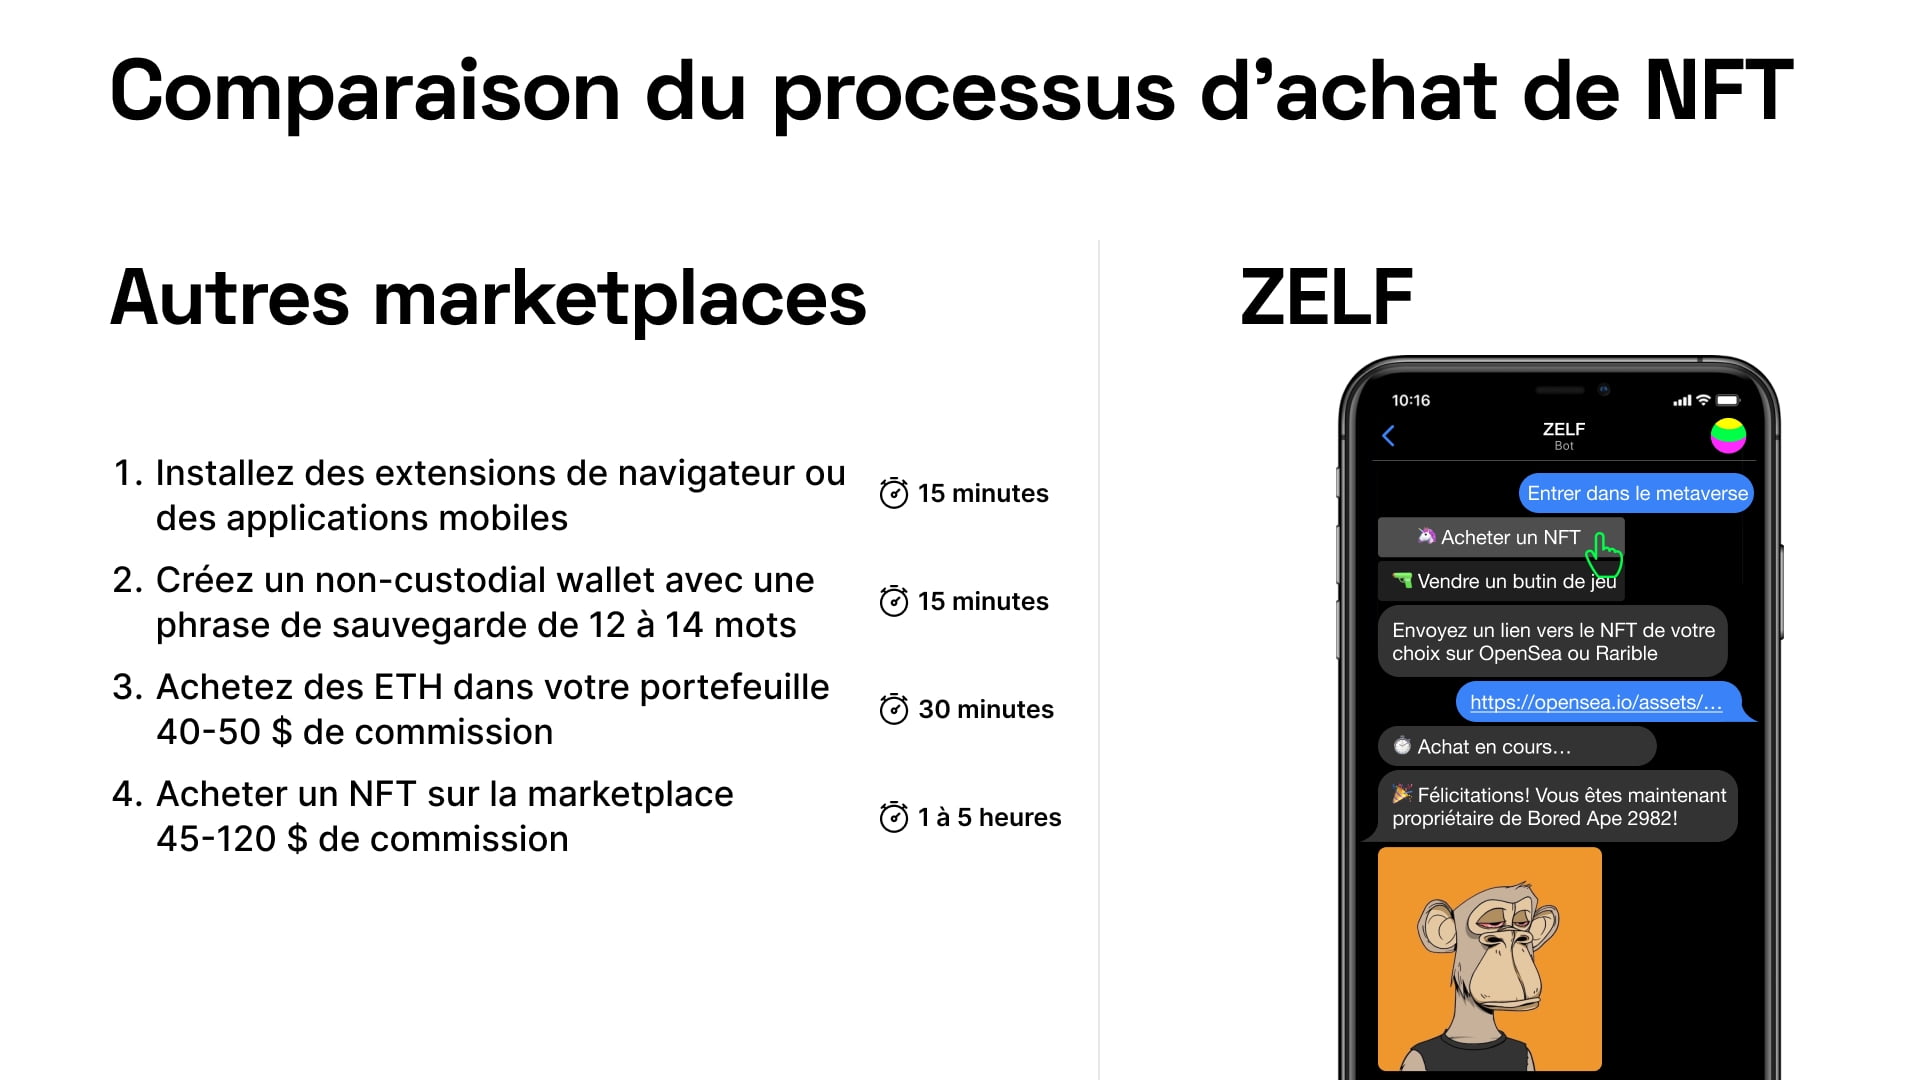 Comparison of NFT purchases between Zelf and other markets